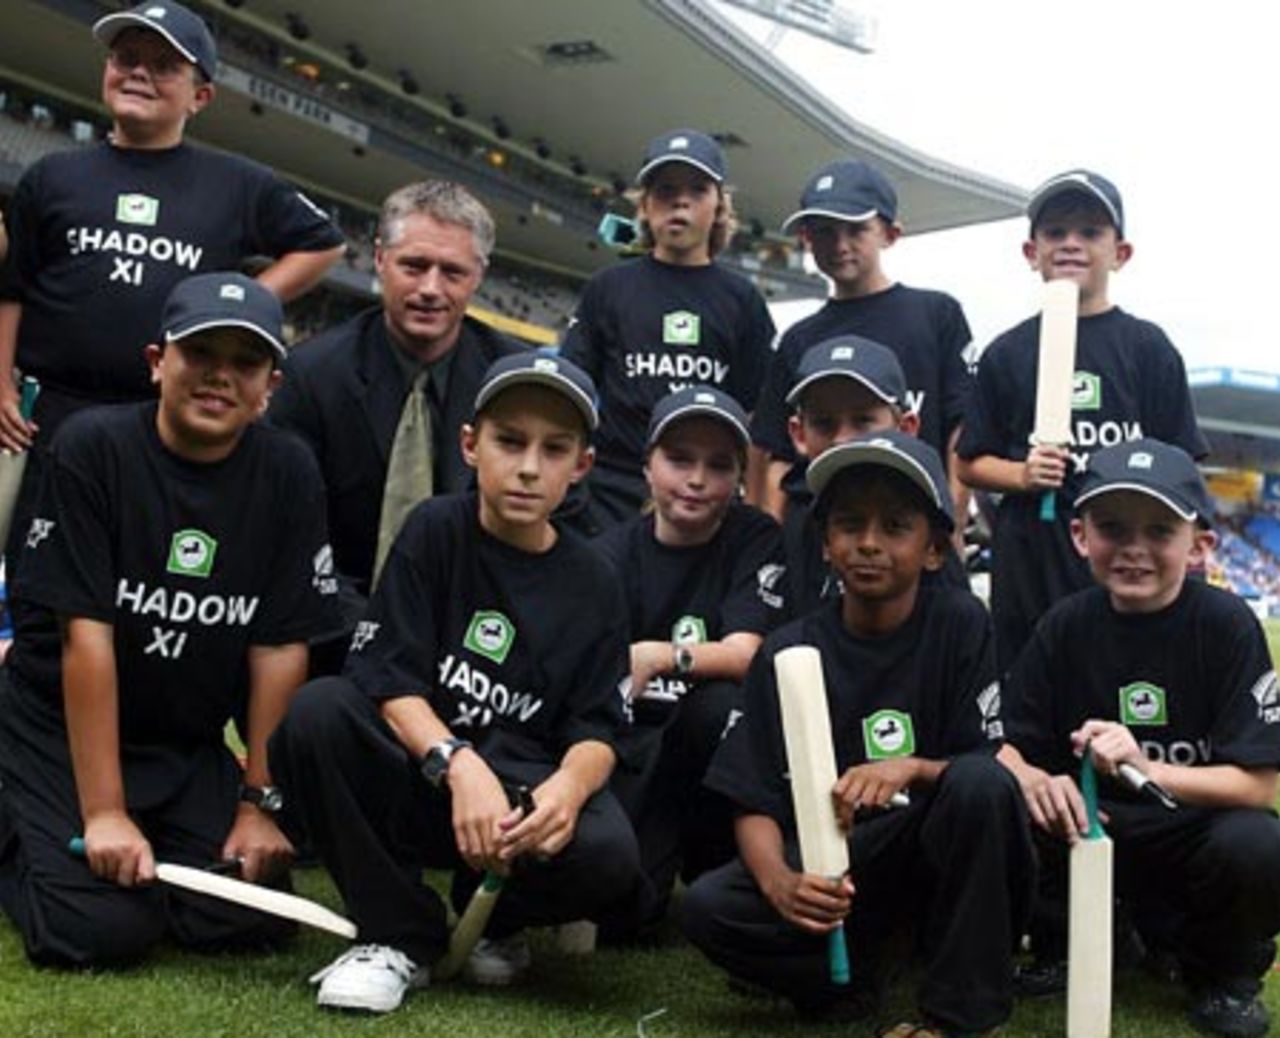 National Bank sponsorship manager Gavin Larsen with members of the Shadow XI. The Shadow XI receive a signed bat from a designated CLEAR Black Cap player before returning to free seats in the crowd. 4th ODI: New Zealand v England at Eden Park, Auckland, 23 February 2002.